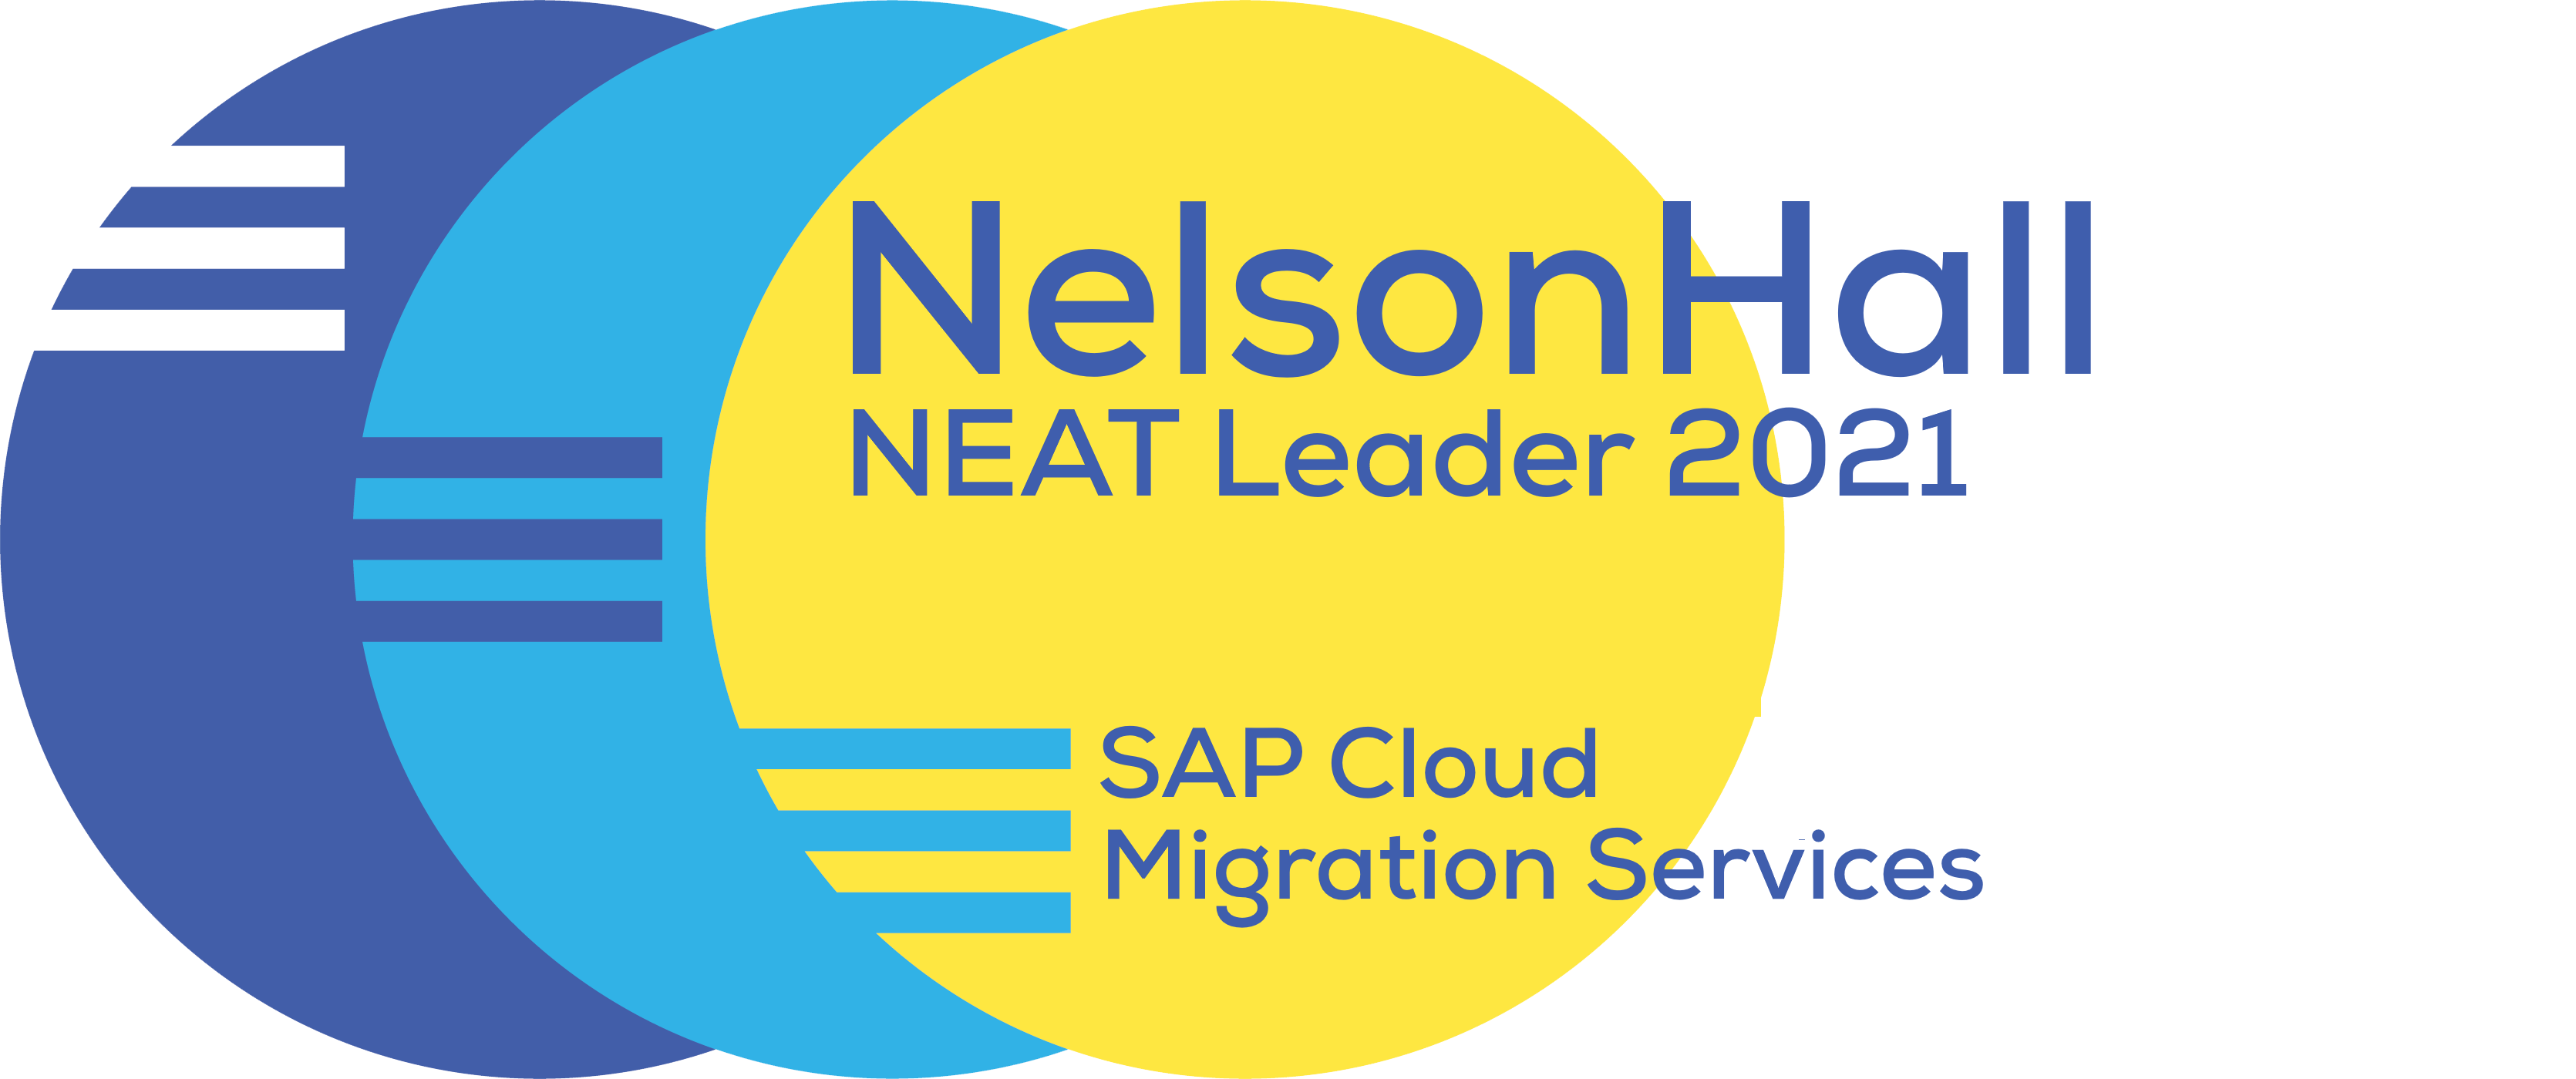 Wipro is positioned as a “Leader” in the NEAT Vendor evaluation by NelsonHall for SAP Cloud Migration (Overall) 2021